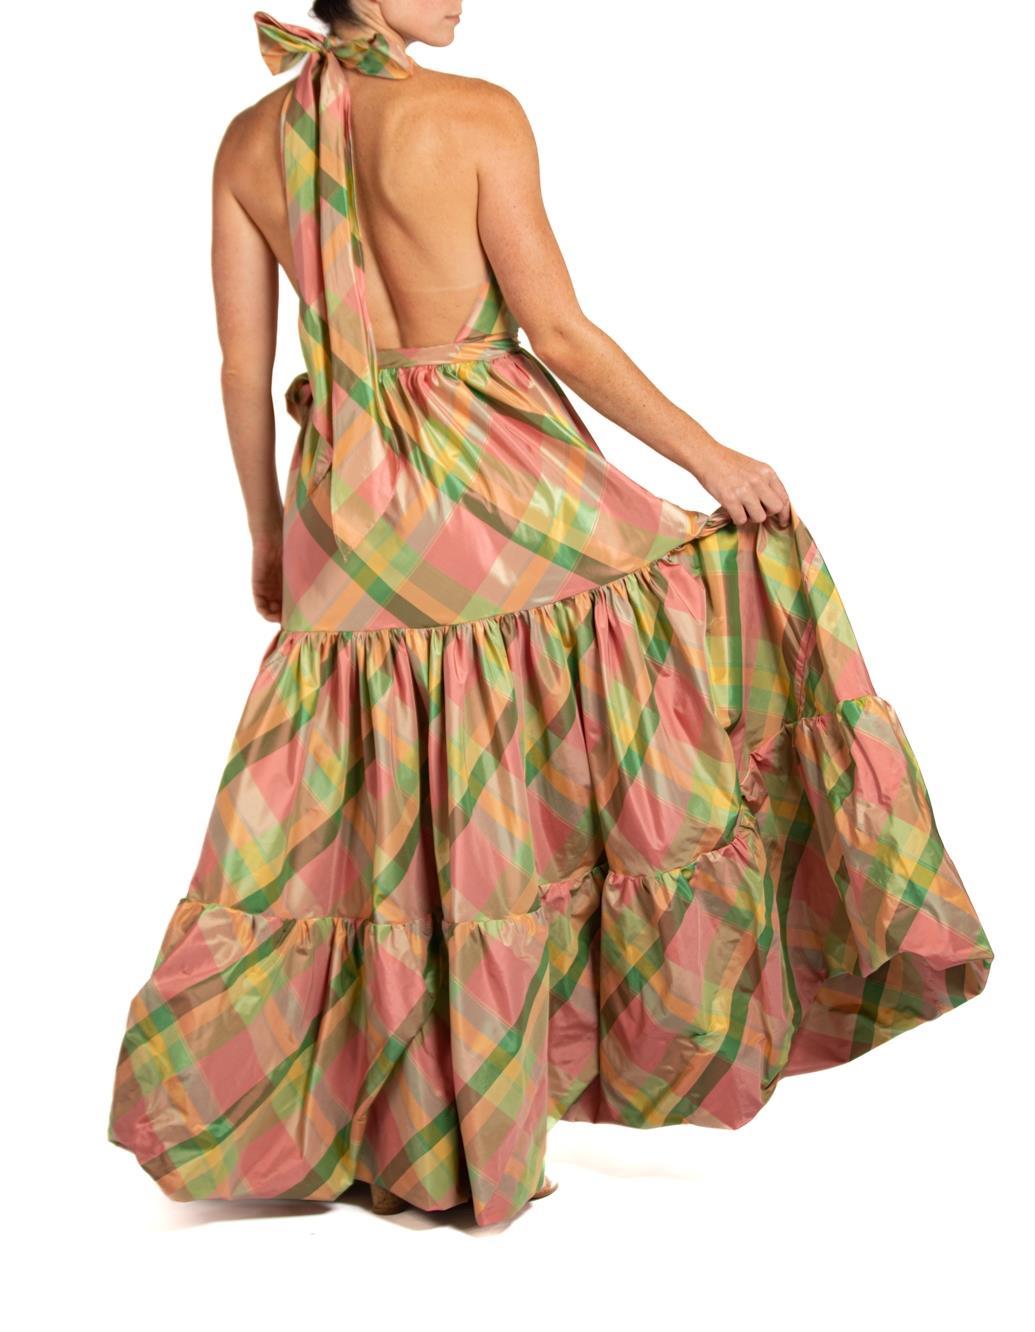 MORPHEW COLLECTION Pink & Green Silk Taffeta Plaid Gown For Sale 4